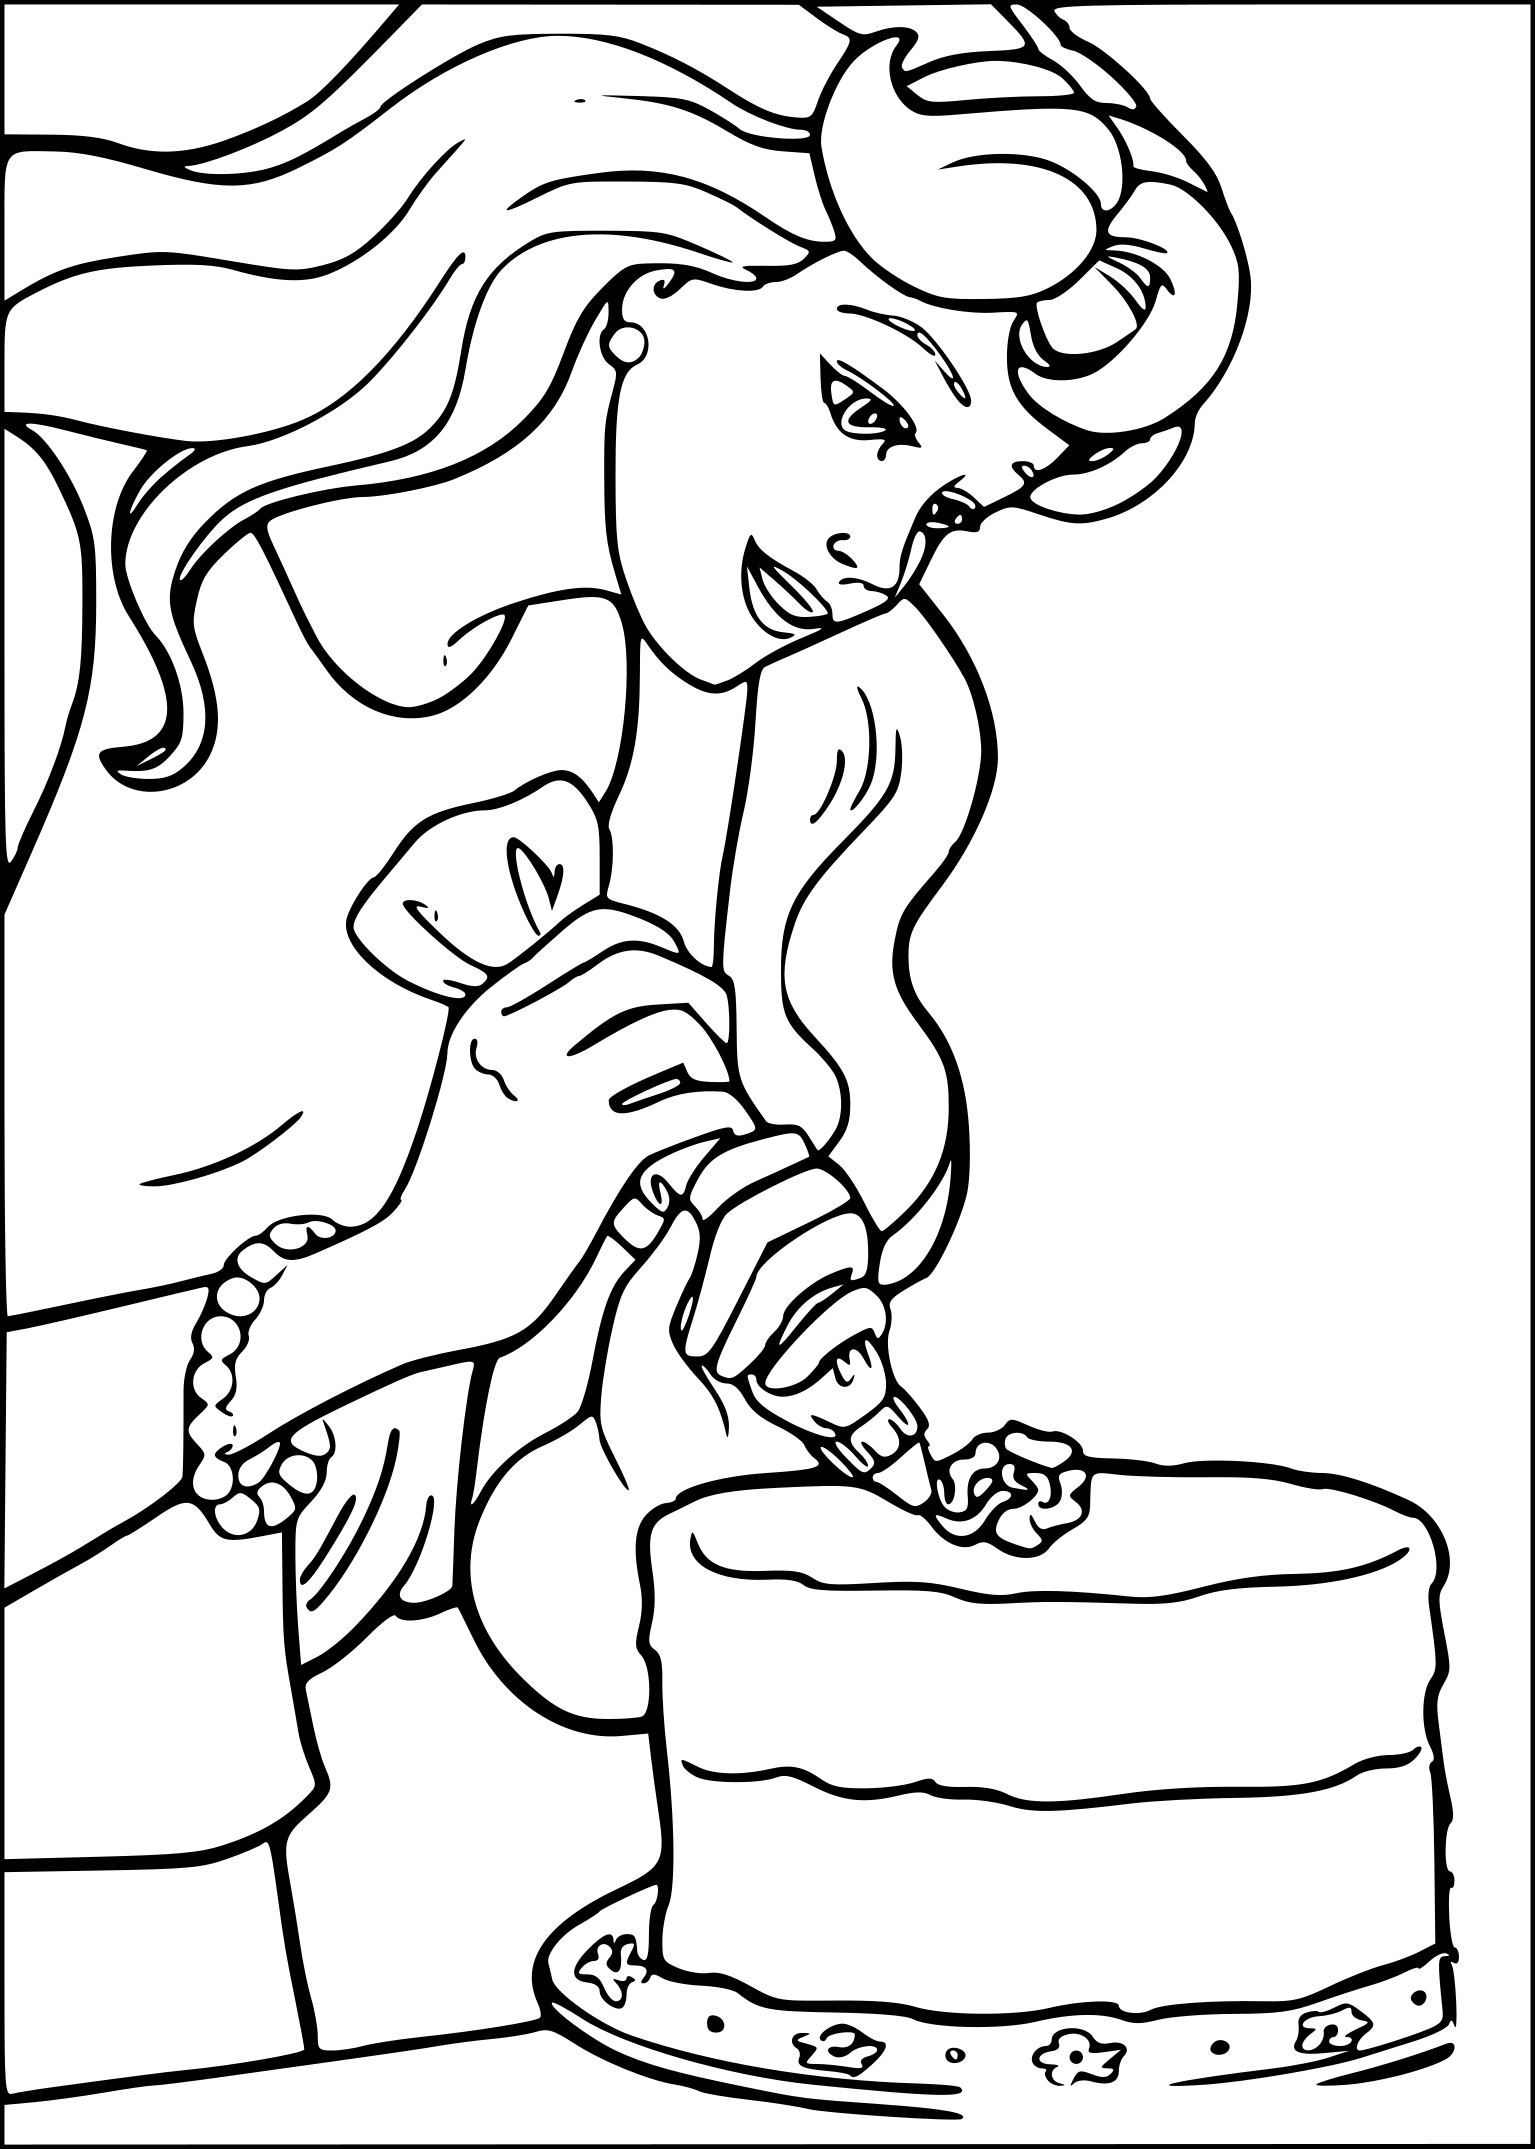 Barbie Cooks A Cake coloring page